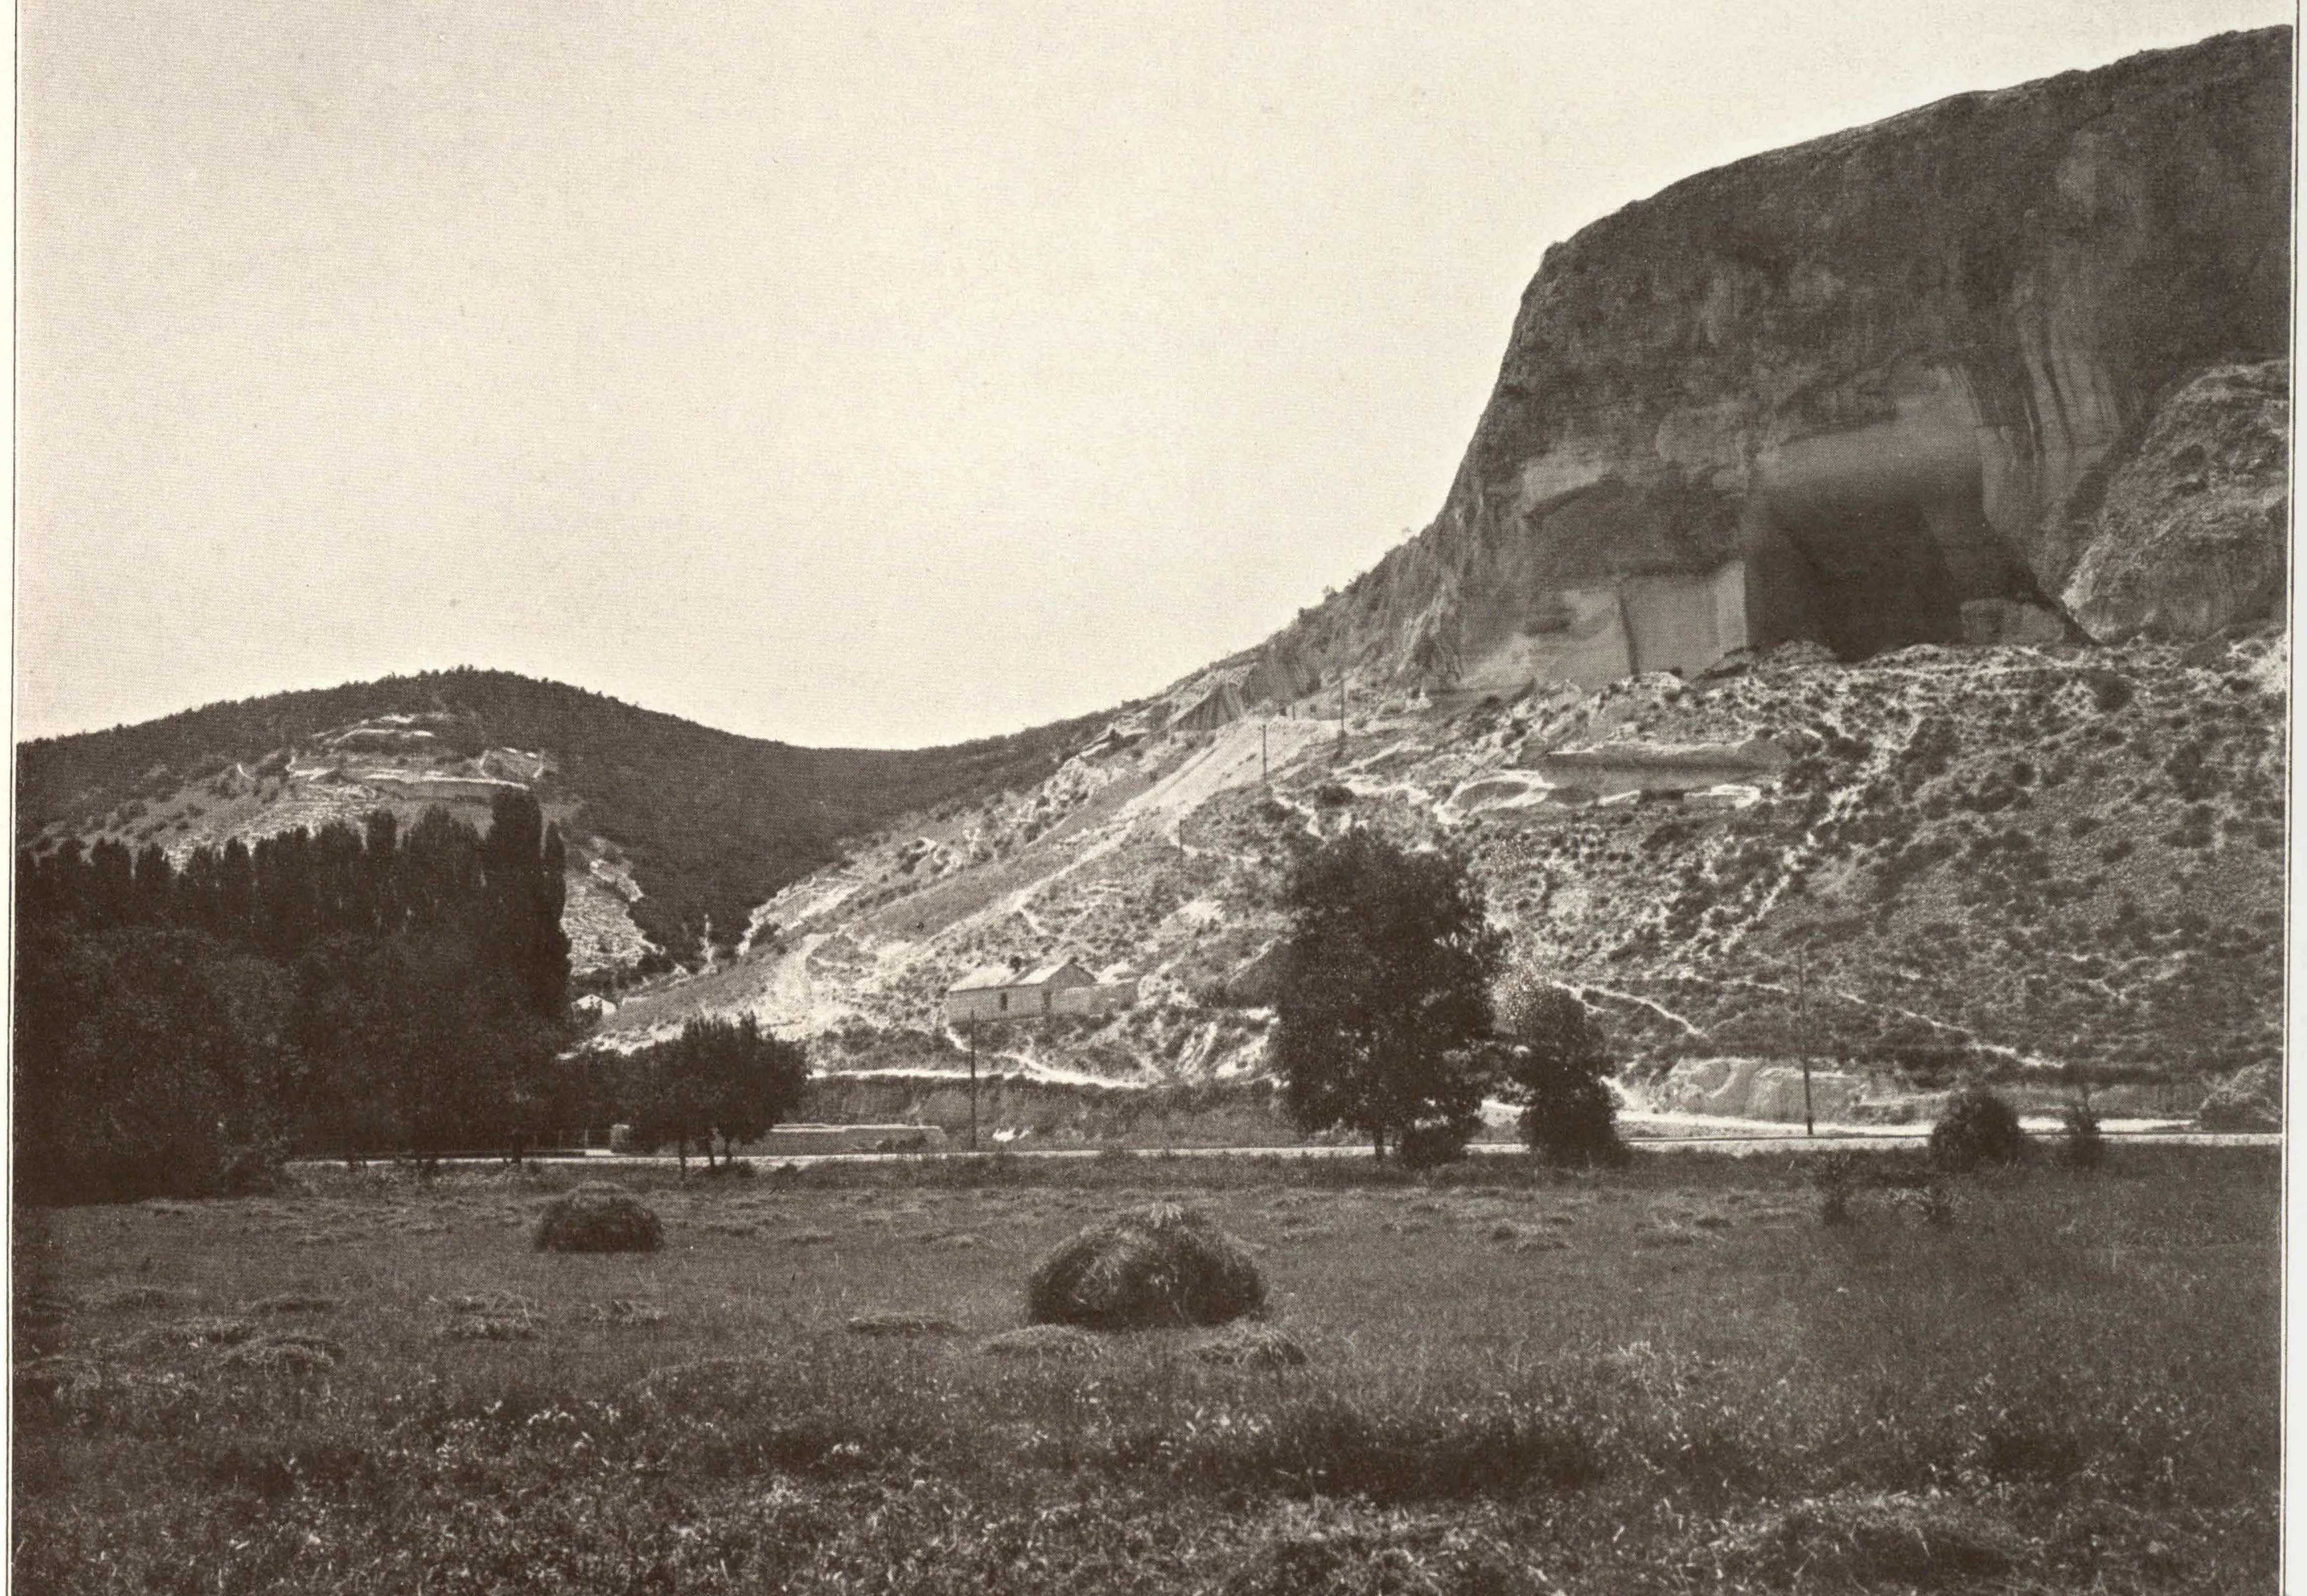 Slope of the Devil Ravine, where British battery # 1 was located (the top of the left slope). Photographs by Colonel Vladislav Klembovsky/Album BATTLEFIELDS OF THE CRIMEAN CAMPAIGN 1854-1855/courtesy of the State Historic Public Library of Russia